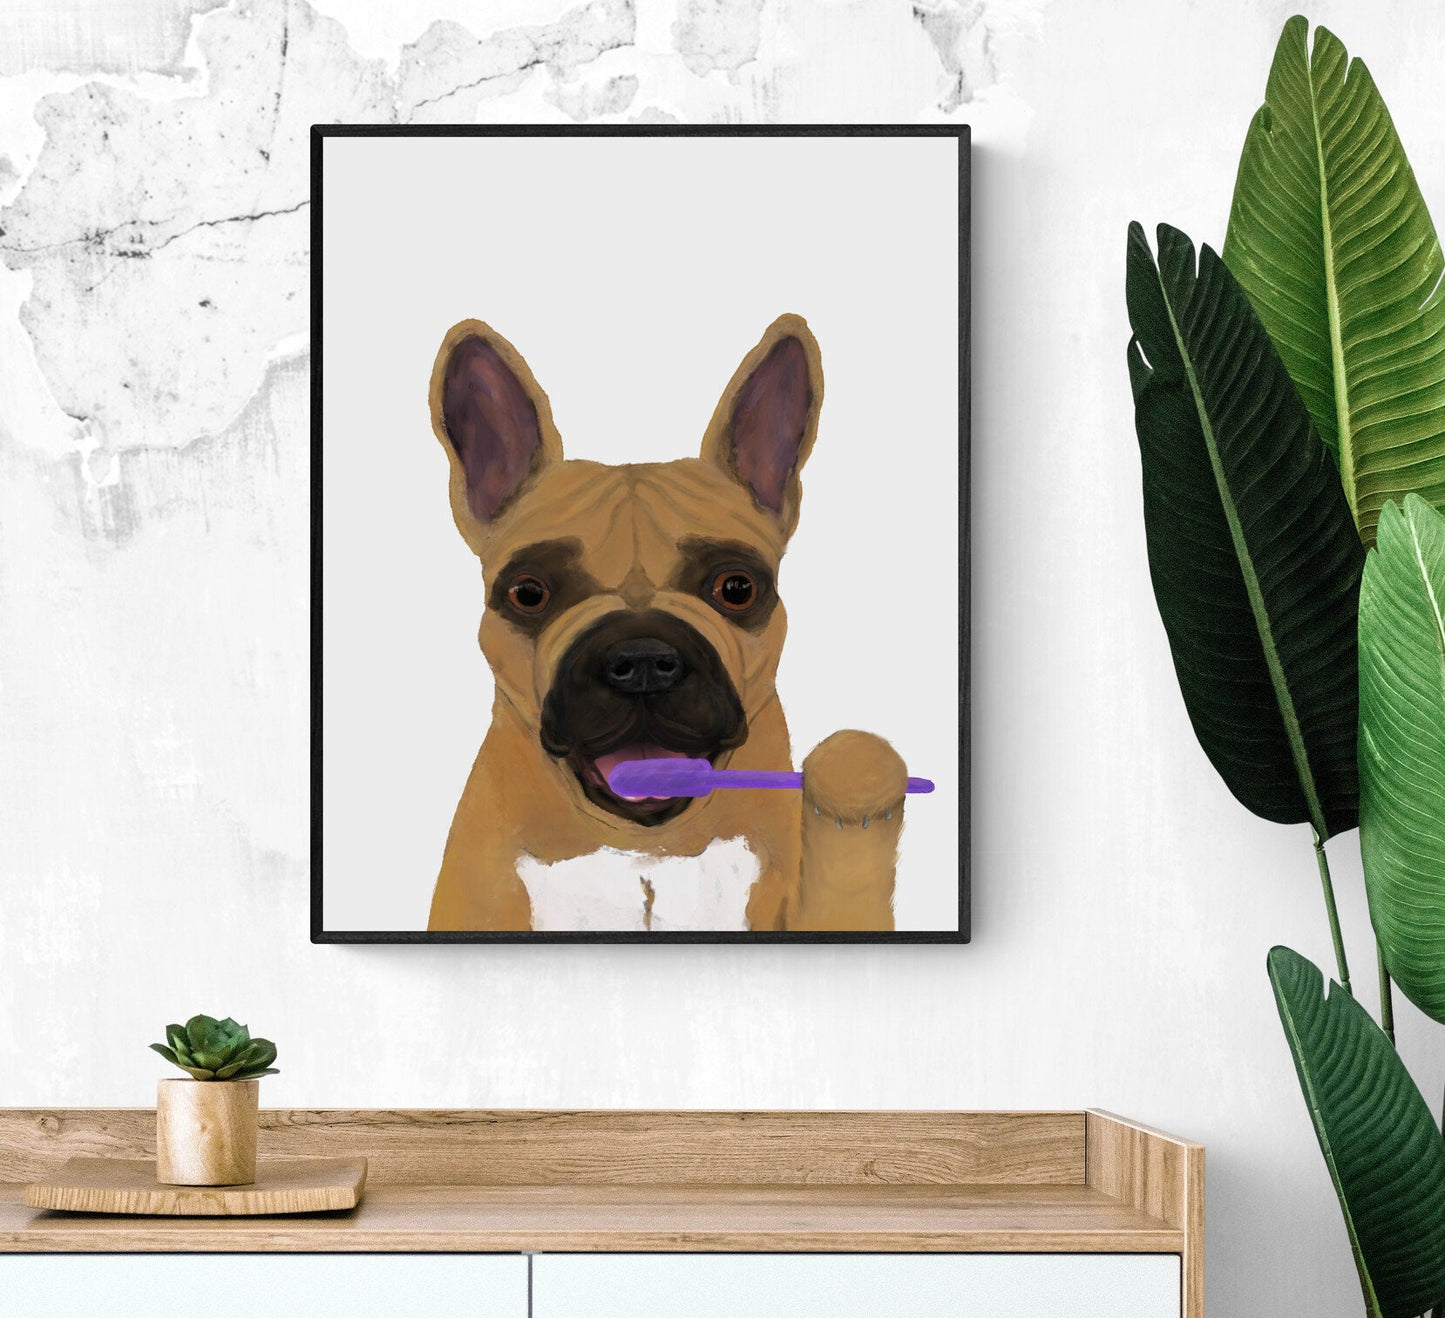 French Bulldog Brushing Teeth Print, Brown Frenchie with Toothbrush, Bathroom Wall Art, Dog Painting, Dog In Bath Illustration, Dog Lover